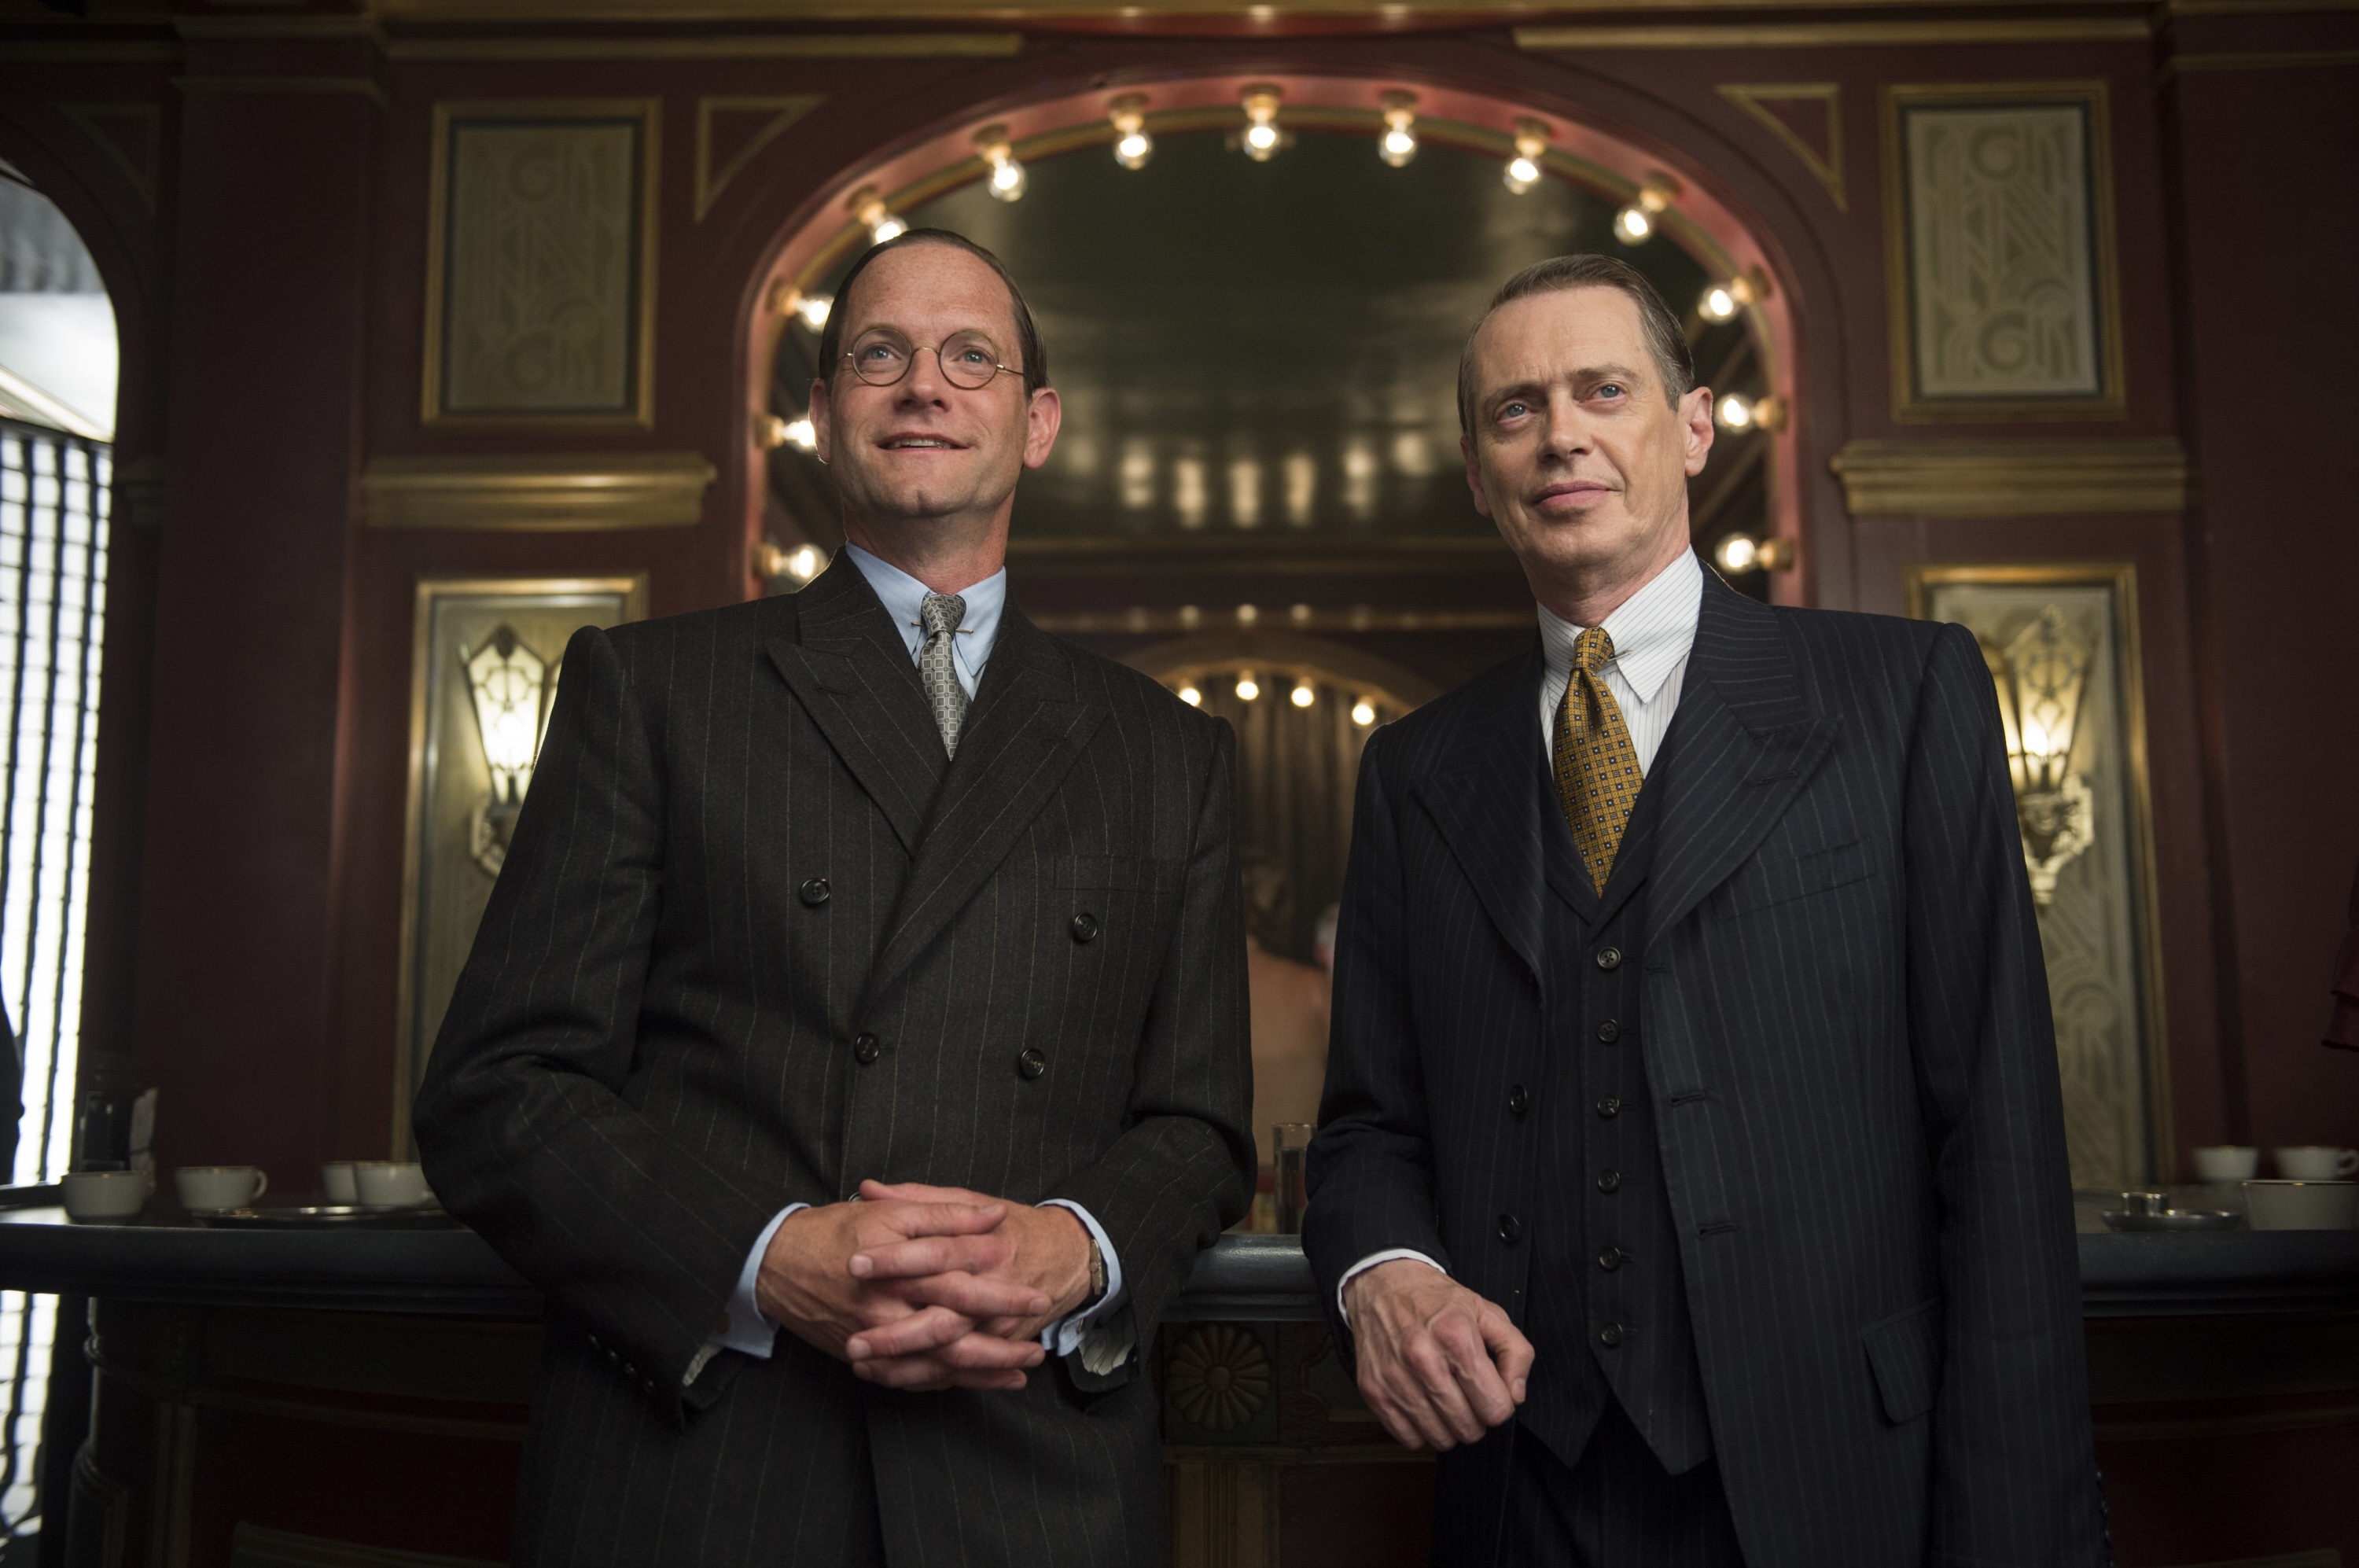 <p>Based on the real-life political figure Enoch L. Johnson, "Boardwalk Empire" was a lush, award-winning HBO original series about how "Nucky" (played by Steve Buscemi, right) came to rule over Atlantic City, New Jersey, in the 1920s and 1930s by covertly working with other gangsters. The Prohibition-era series ran from 2010 to 2014.</p>